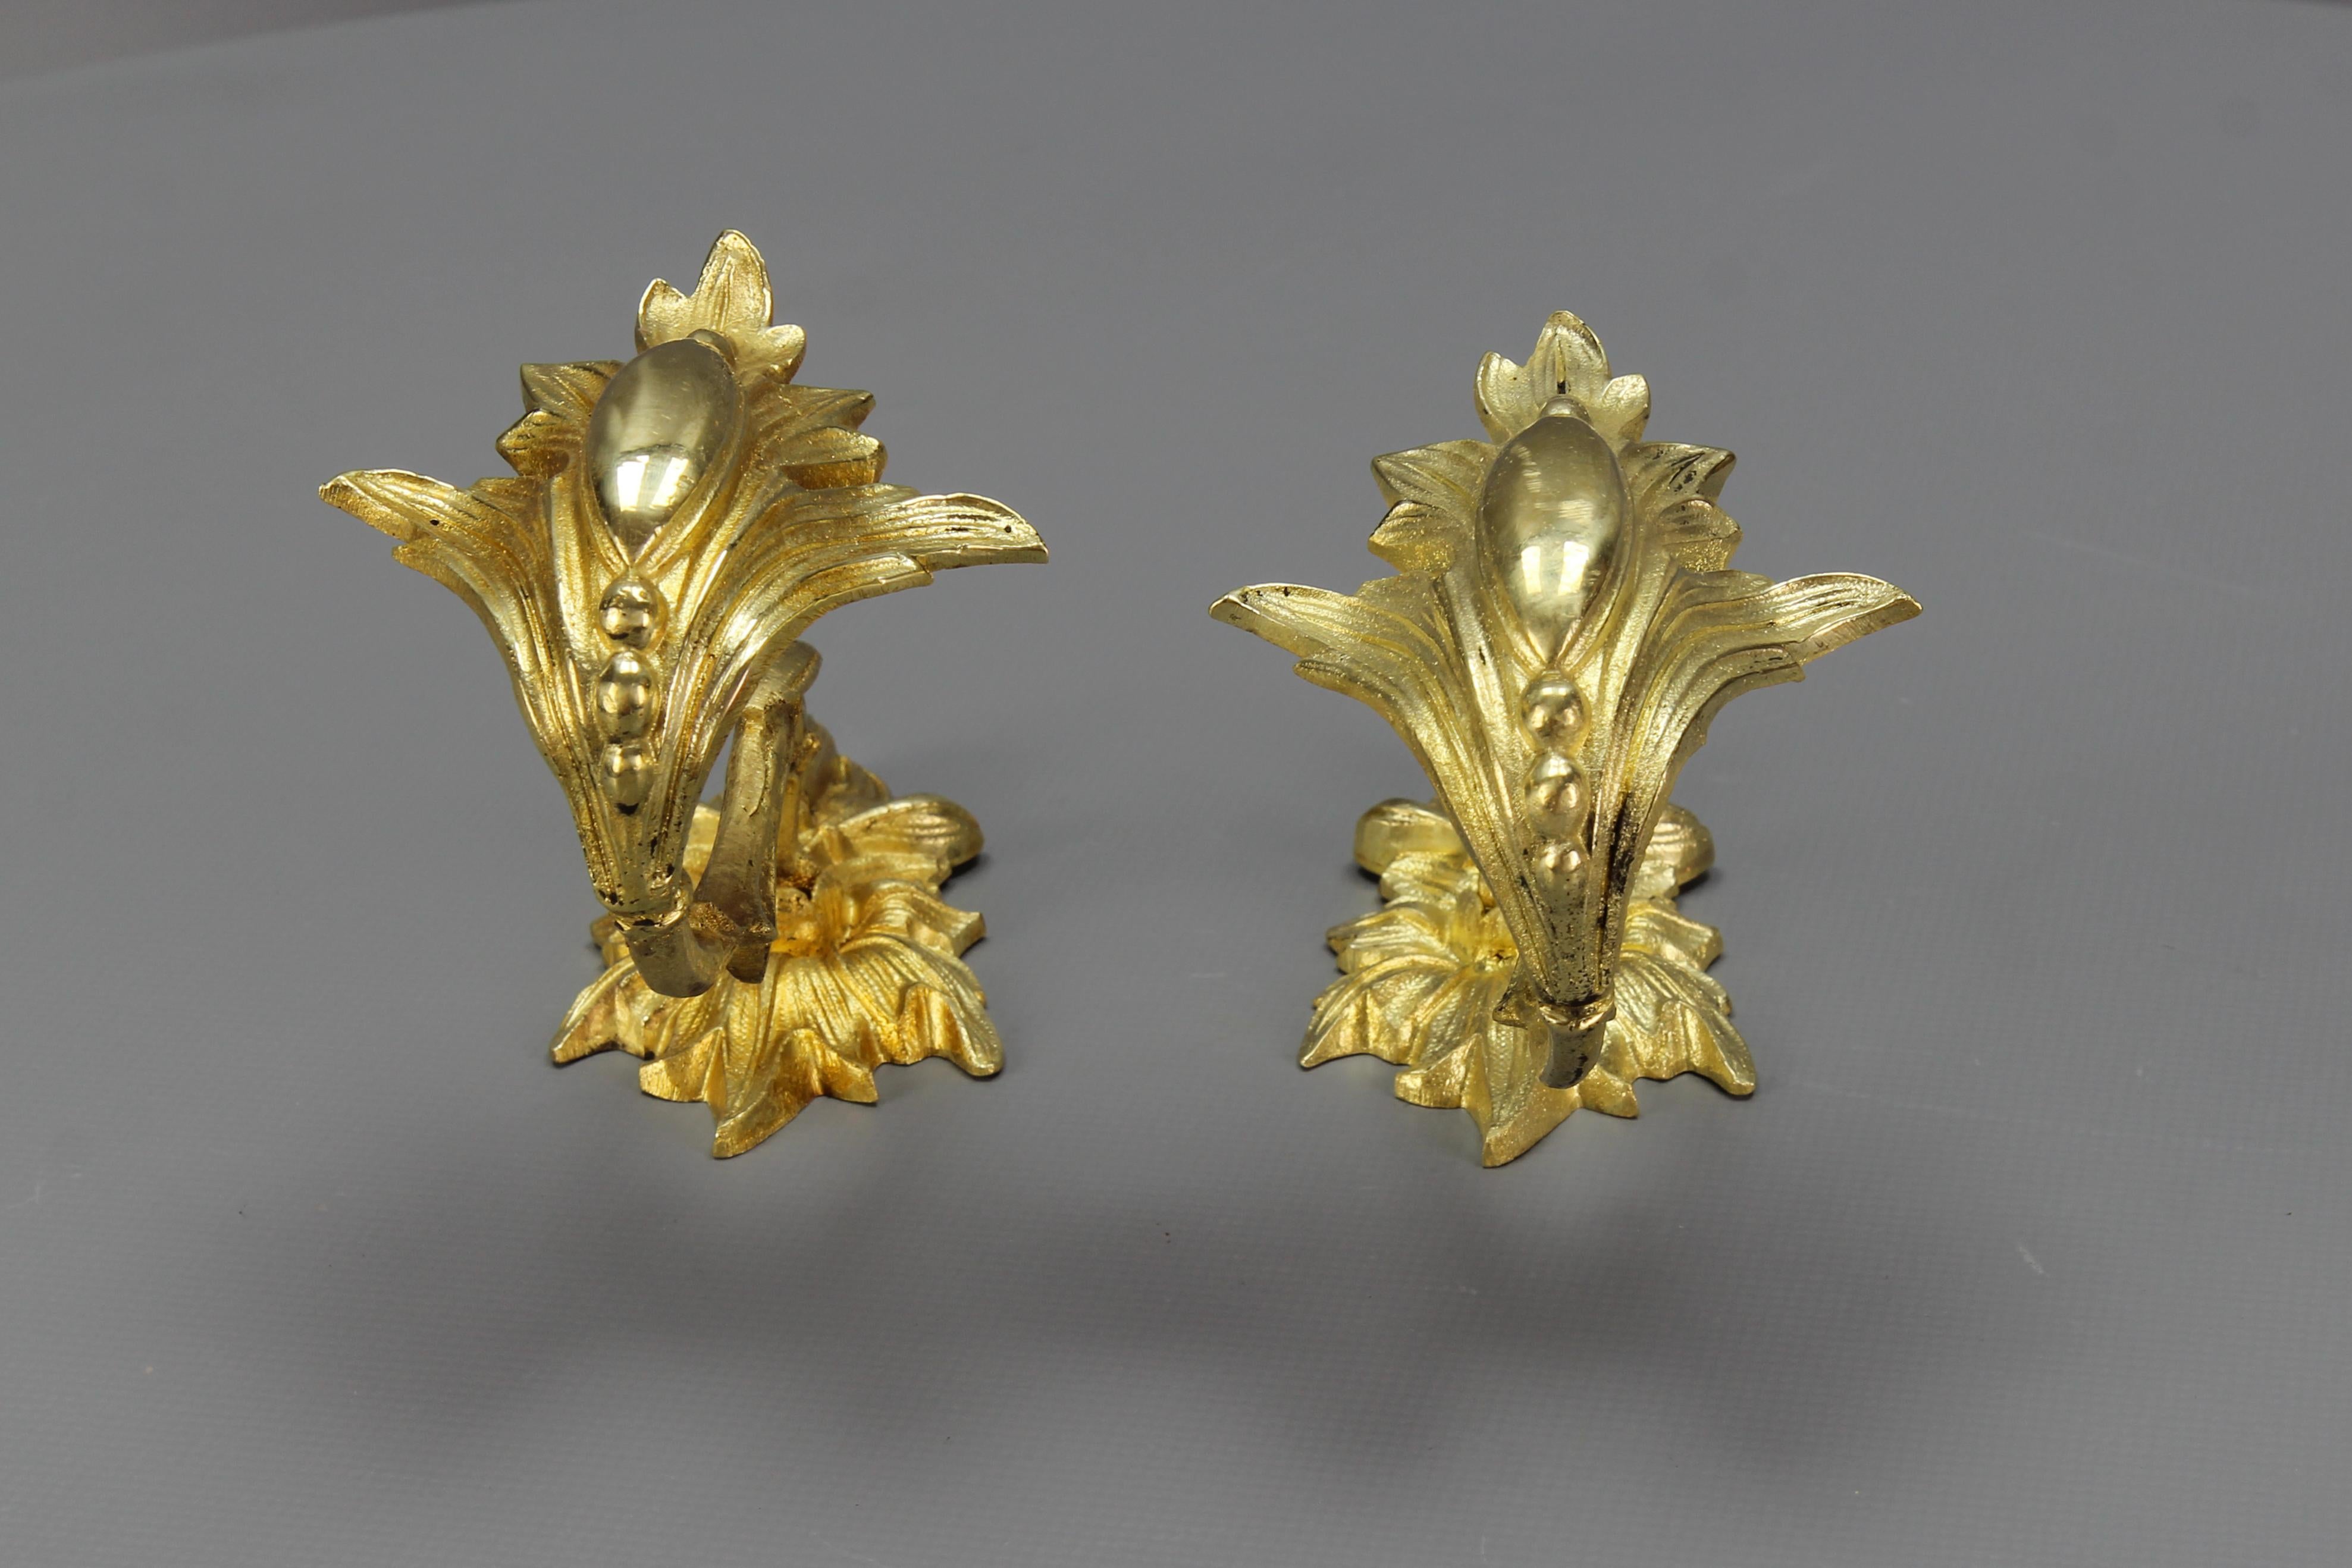 Pair of Antique French Bronze Curtain Tiebacks or Curtain Holders For Sale 6